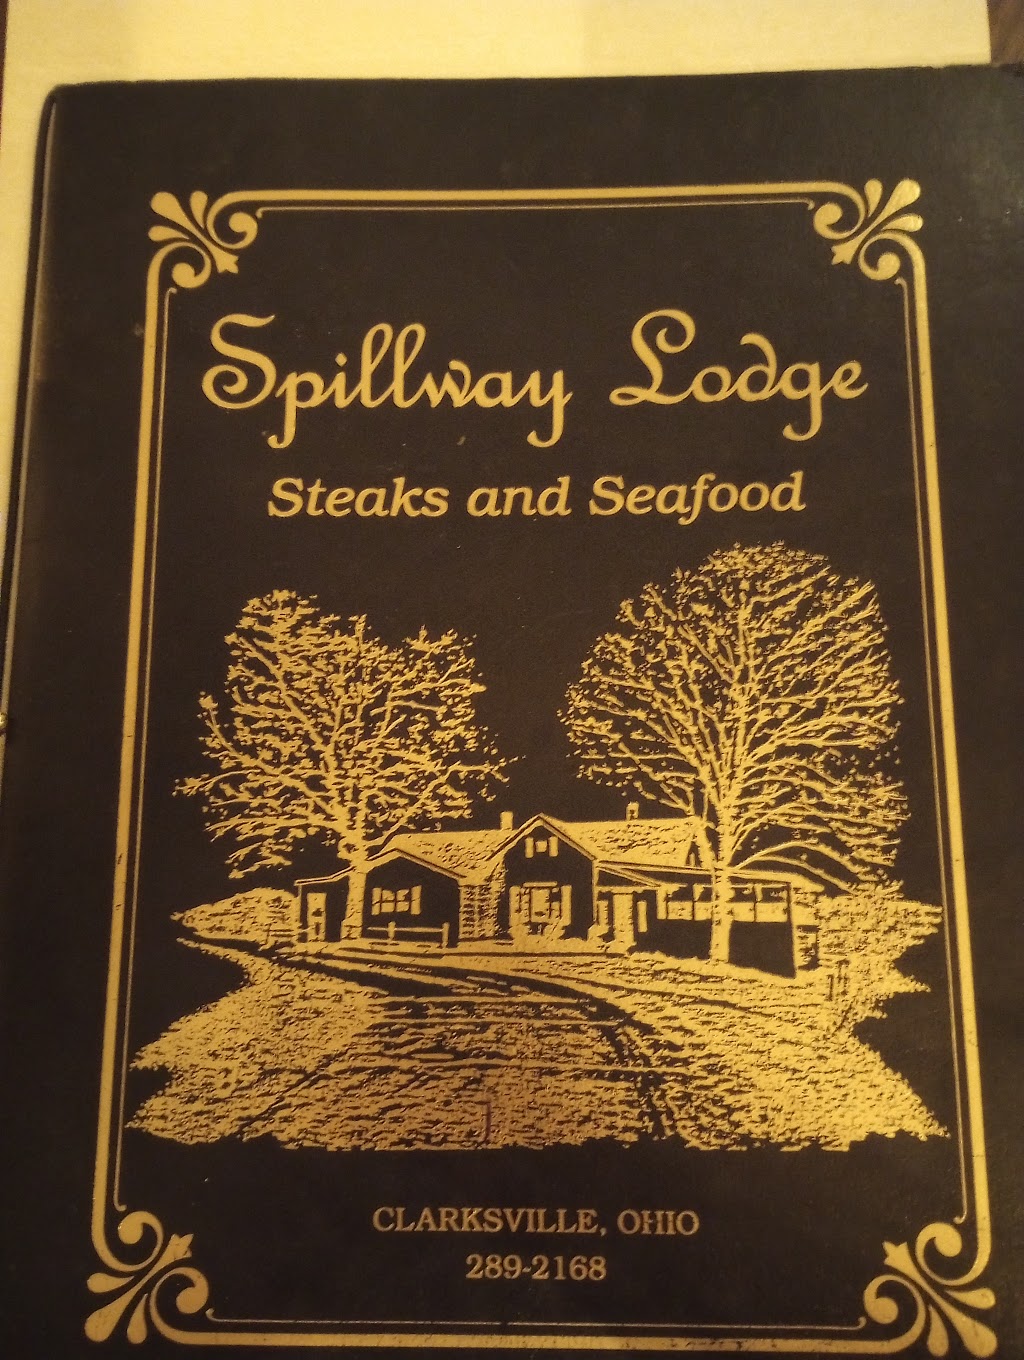 Spillway Lodge | 623 Old State Rd, Clarksville, OH 45113 | Phone: (937) 289-2168